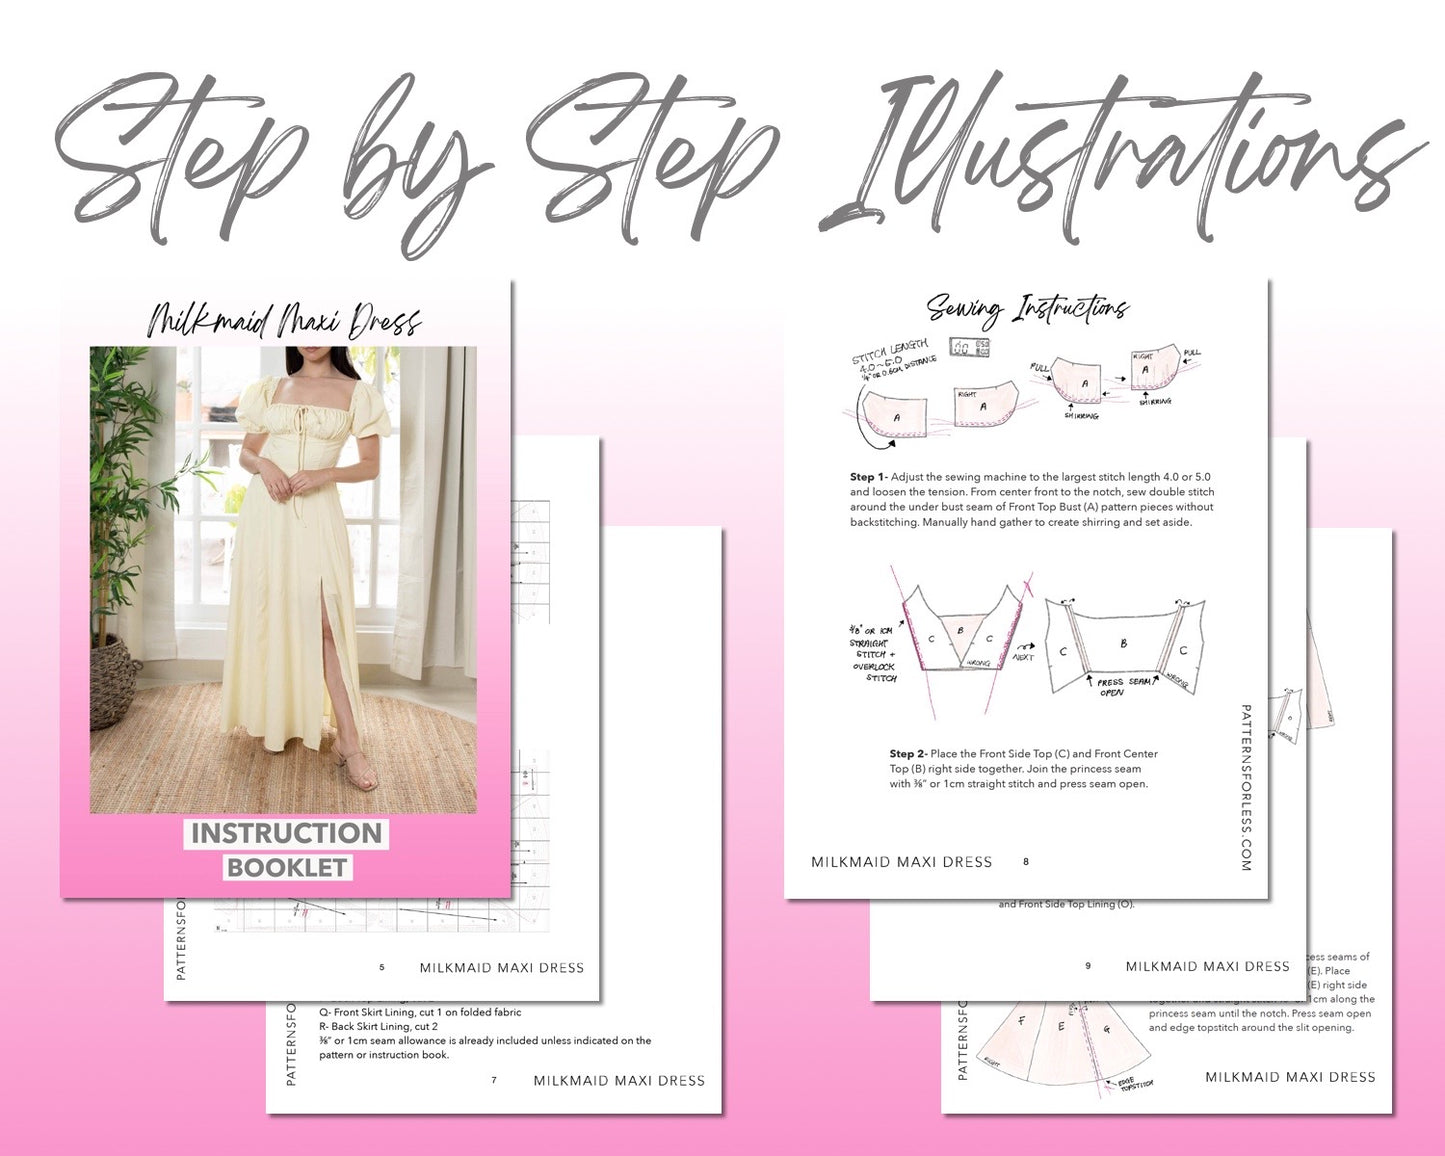 Milkmaid Maxi Dress sewing pattern step by step illustrations.